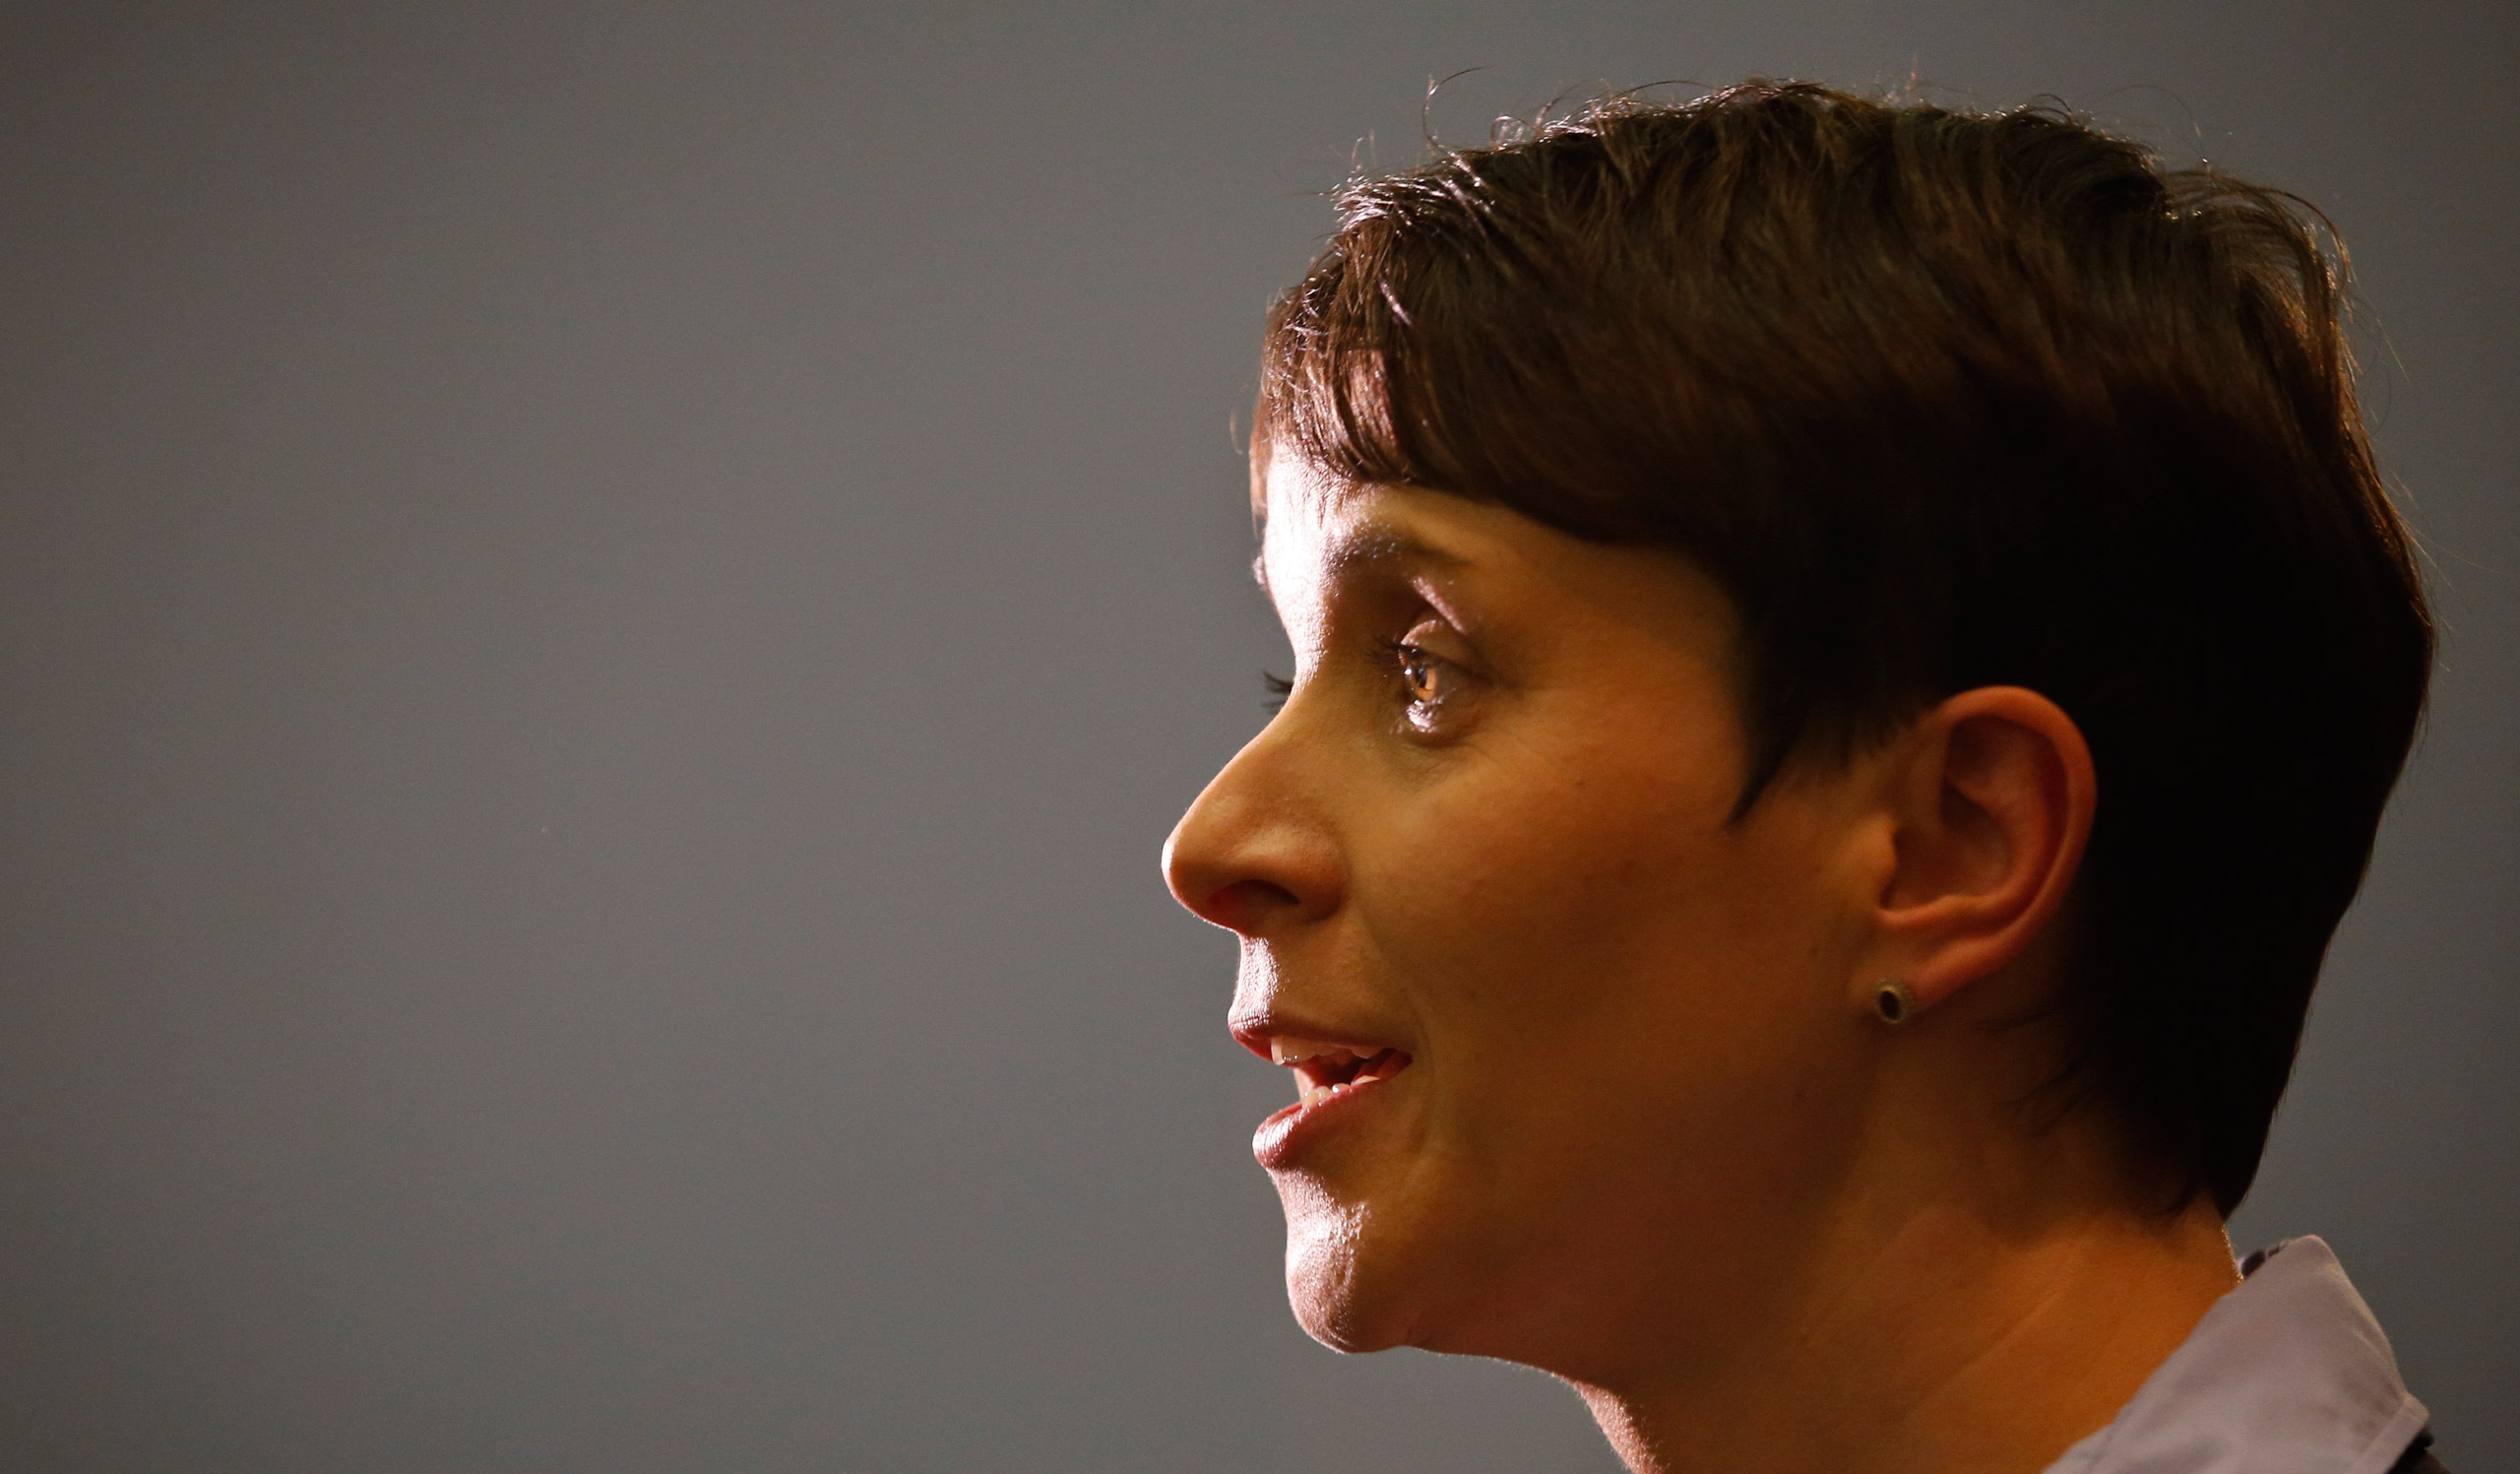 Frauke Petry, chairwoman of the anti-immigration party Alternative for Germany (AfD) talks to the media after first exit polls in three regional state elections at the AfD party's election night party in Berlin, Germany, March 13, 2016.    REUTERS/Fabrizio Bensch  - RTX28Z4C